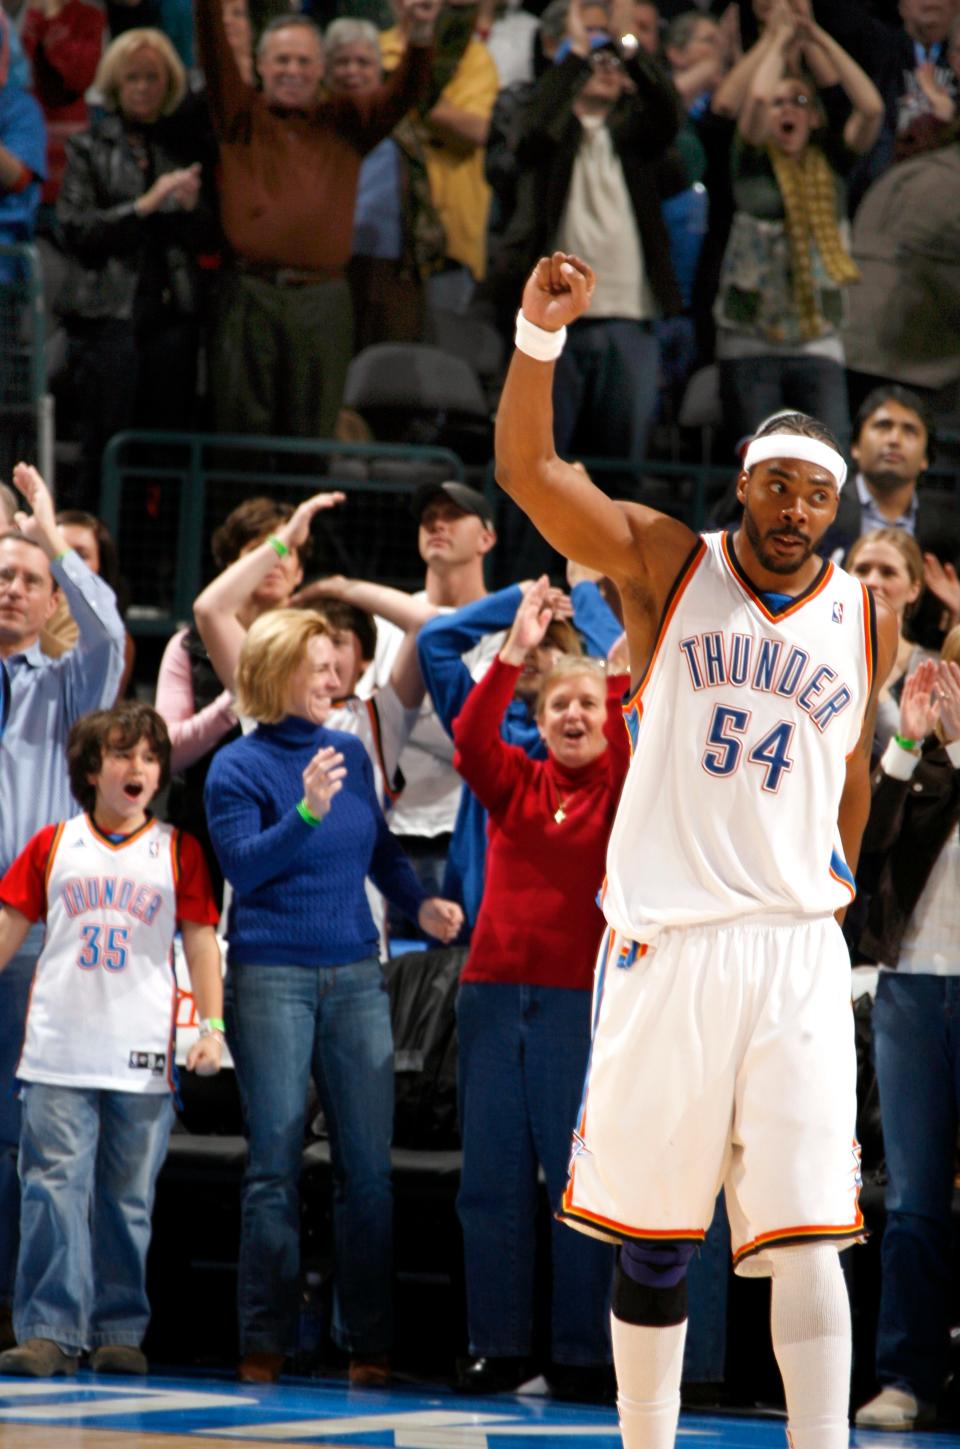 Chris Wilcox (54) celebrates a Thunder win against the Golden State Warriors on Dec. 31, 2008, at the Ford Center in Oklahoma City.